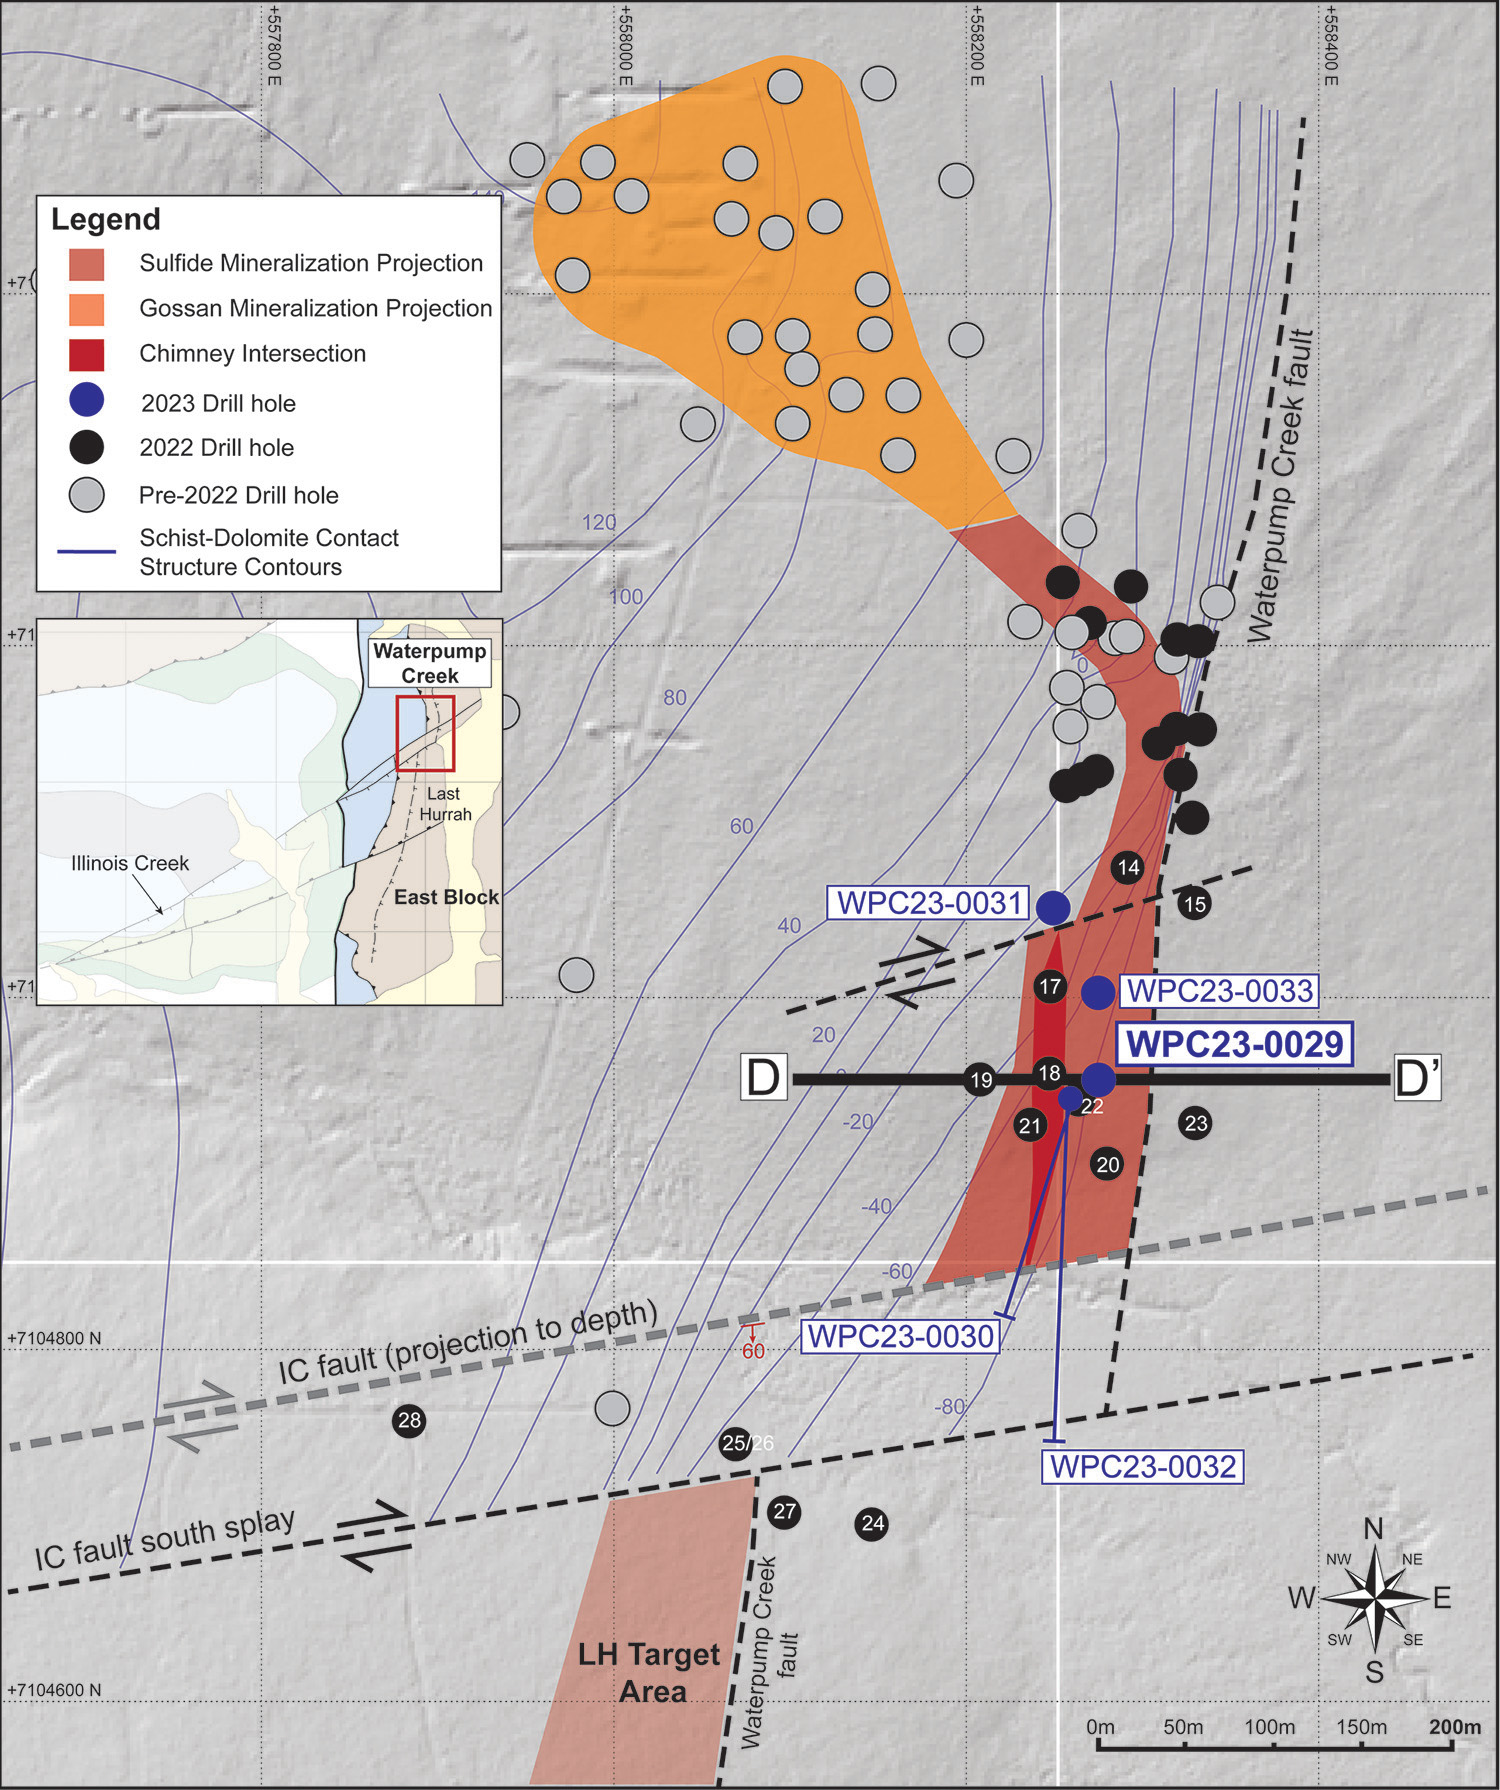 Figure 1: Plan map showing the 2023 completed drill holes